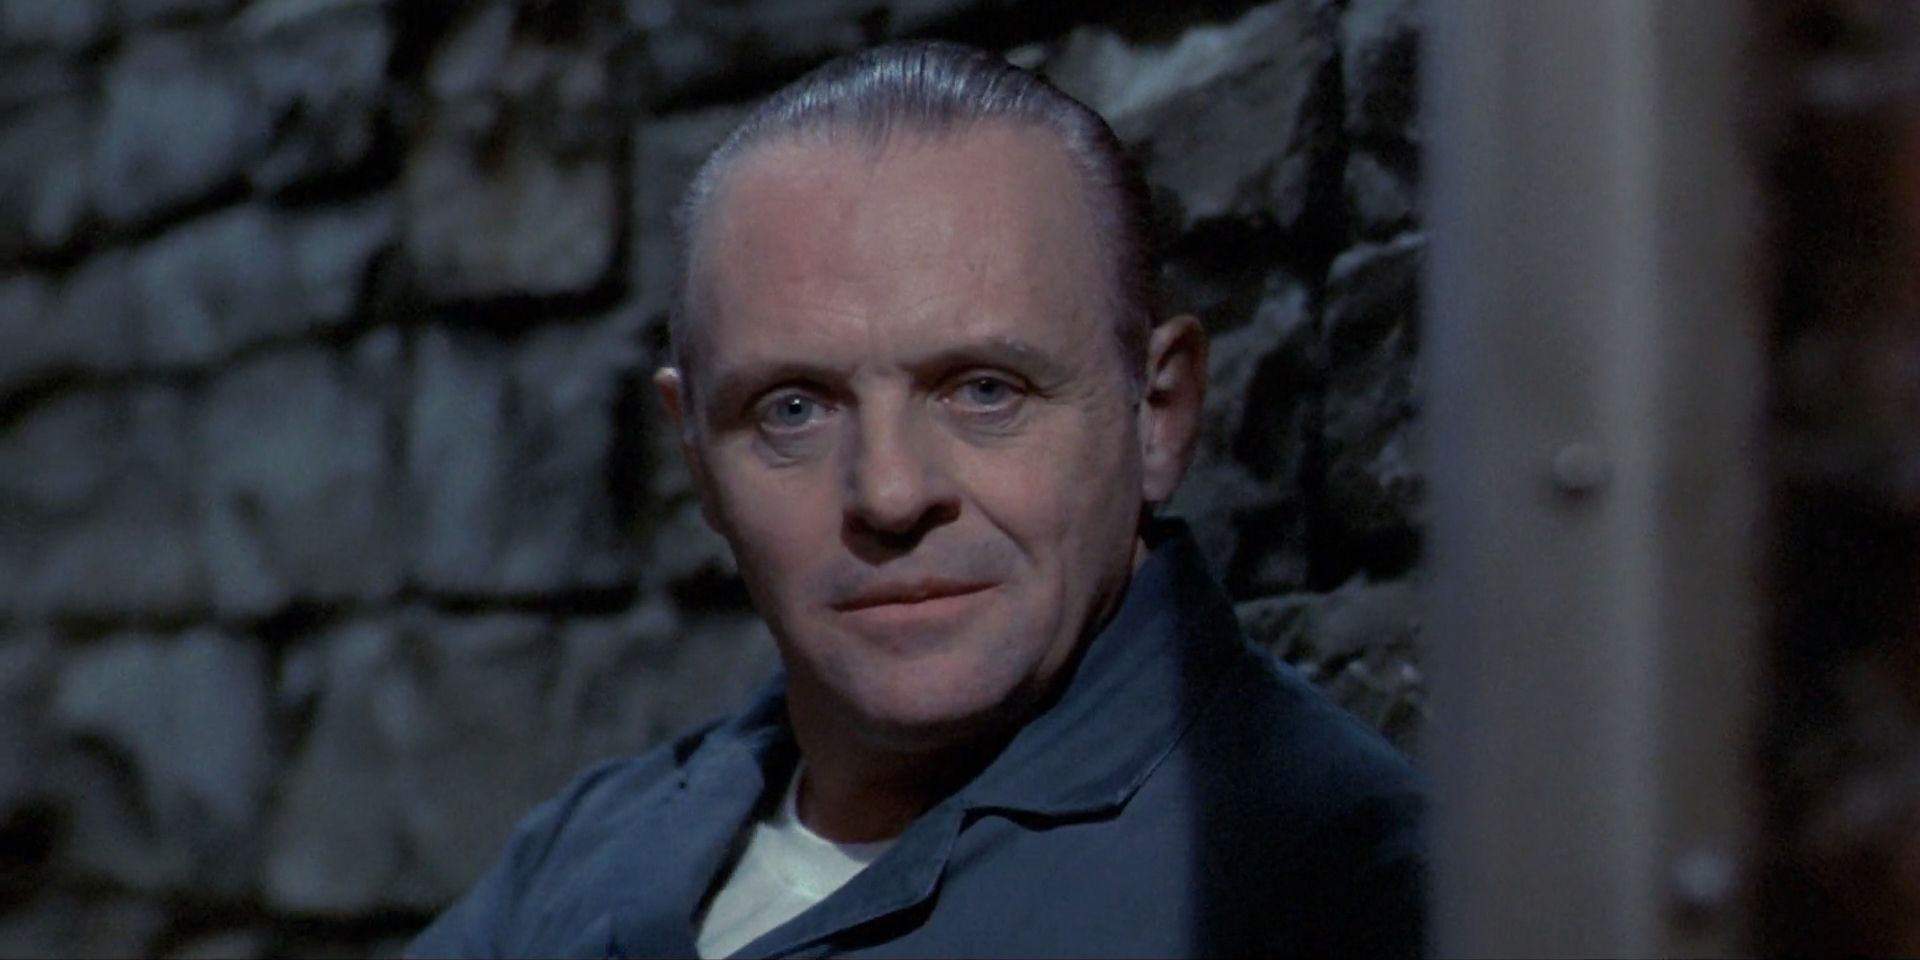 Anthony Hopkins as Hannibal Lecter inside his cell in Silence of the Lambs.